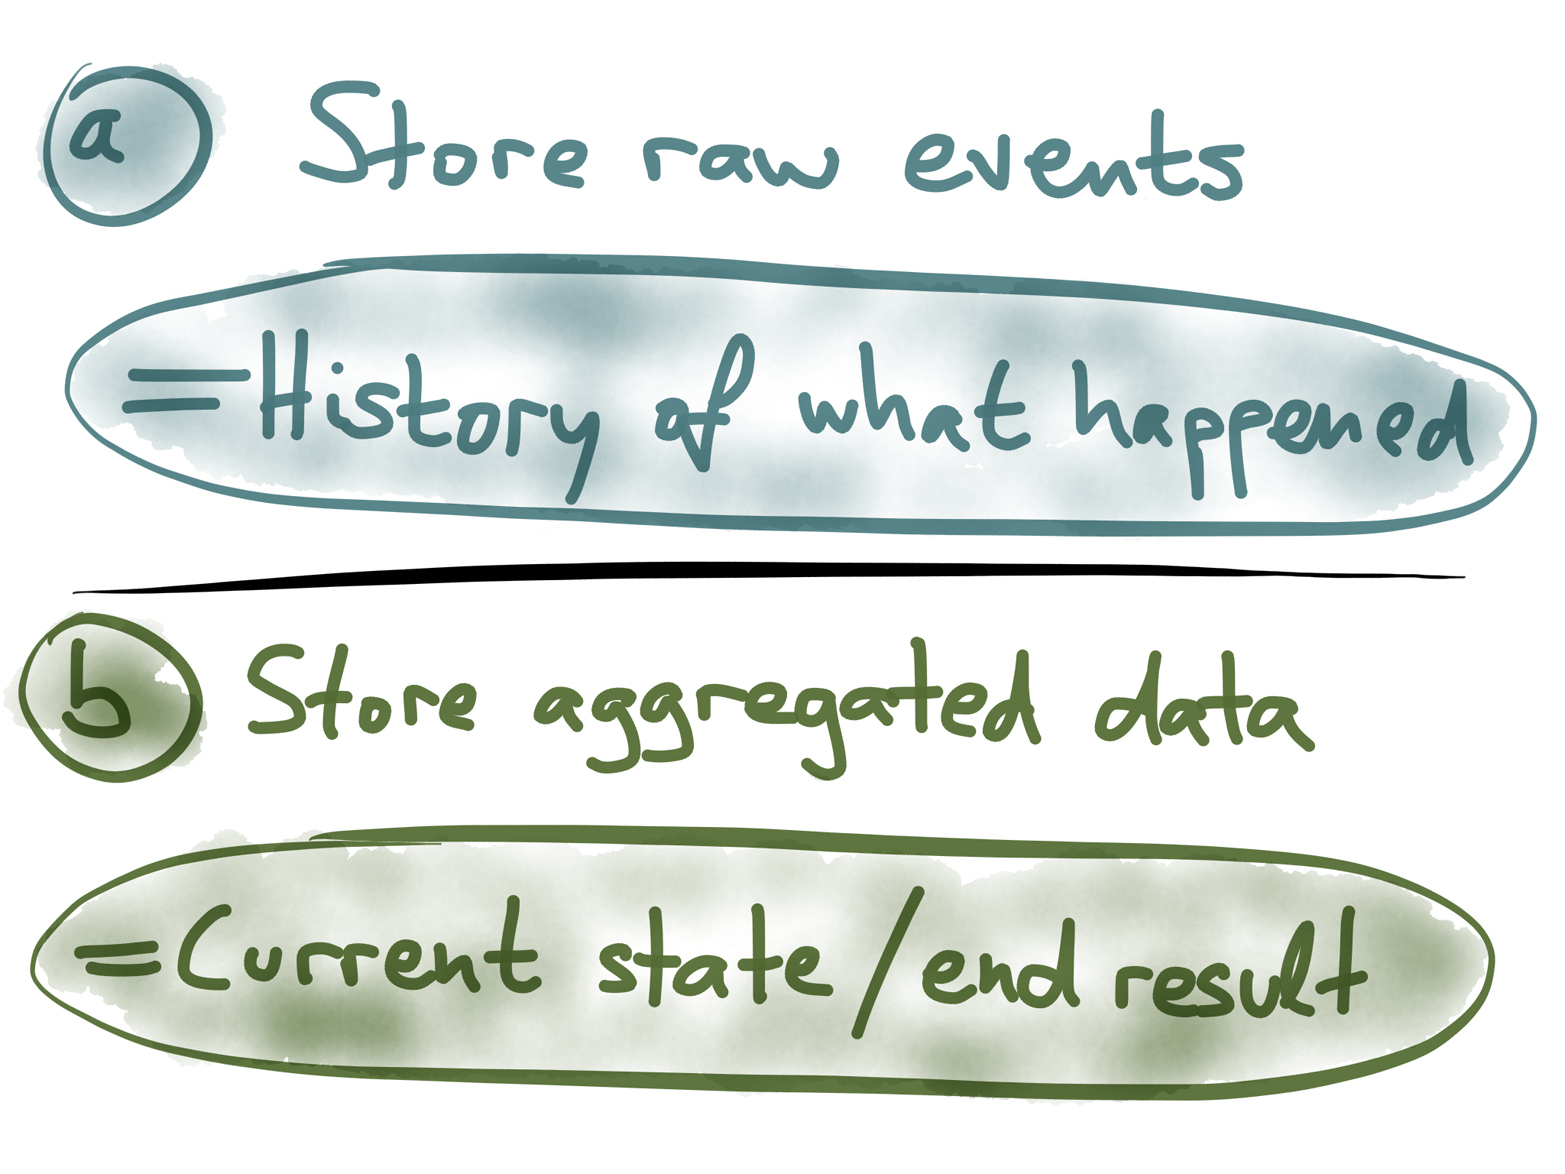 Storing raw events versus aggregated data.